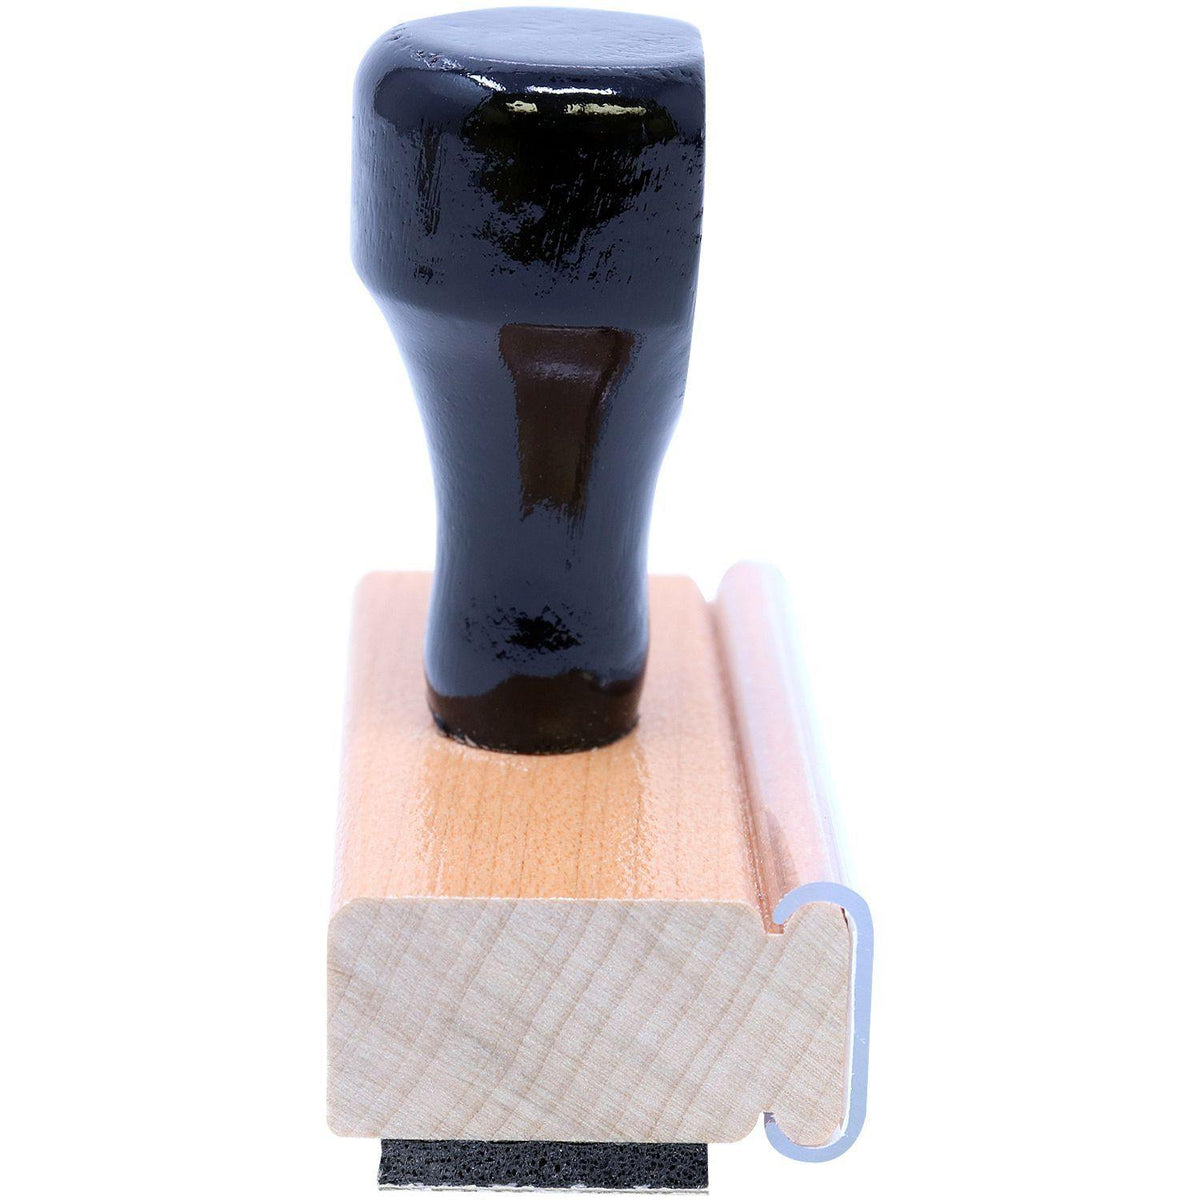 Large Times Faxed with Line Rubber Stamp - Engineer Seal Stamps - Brand_Acorn, Impression Size_Large, Stamp Type_Regular Stamp, Type of Use_Business, Type of Use_General, Type of Use_Office